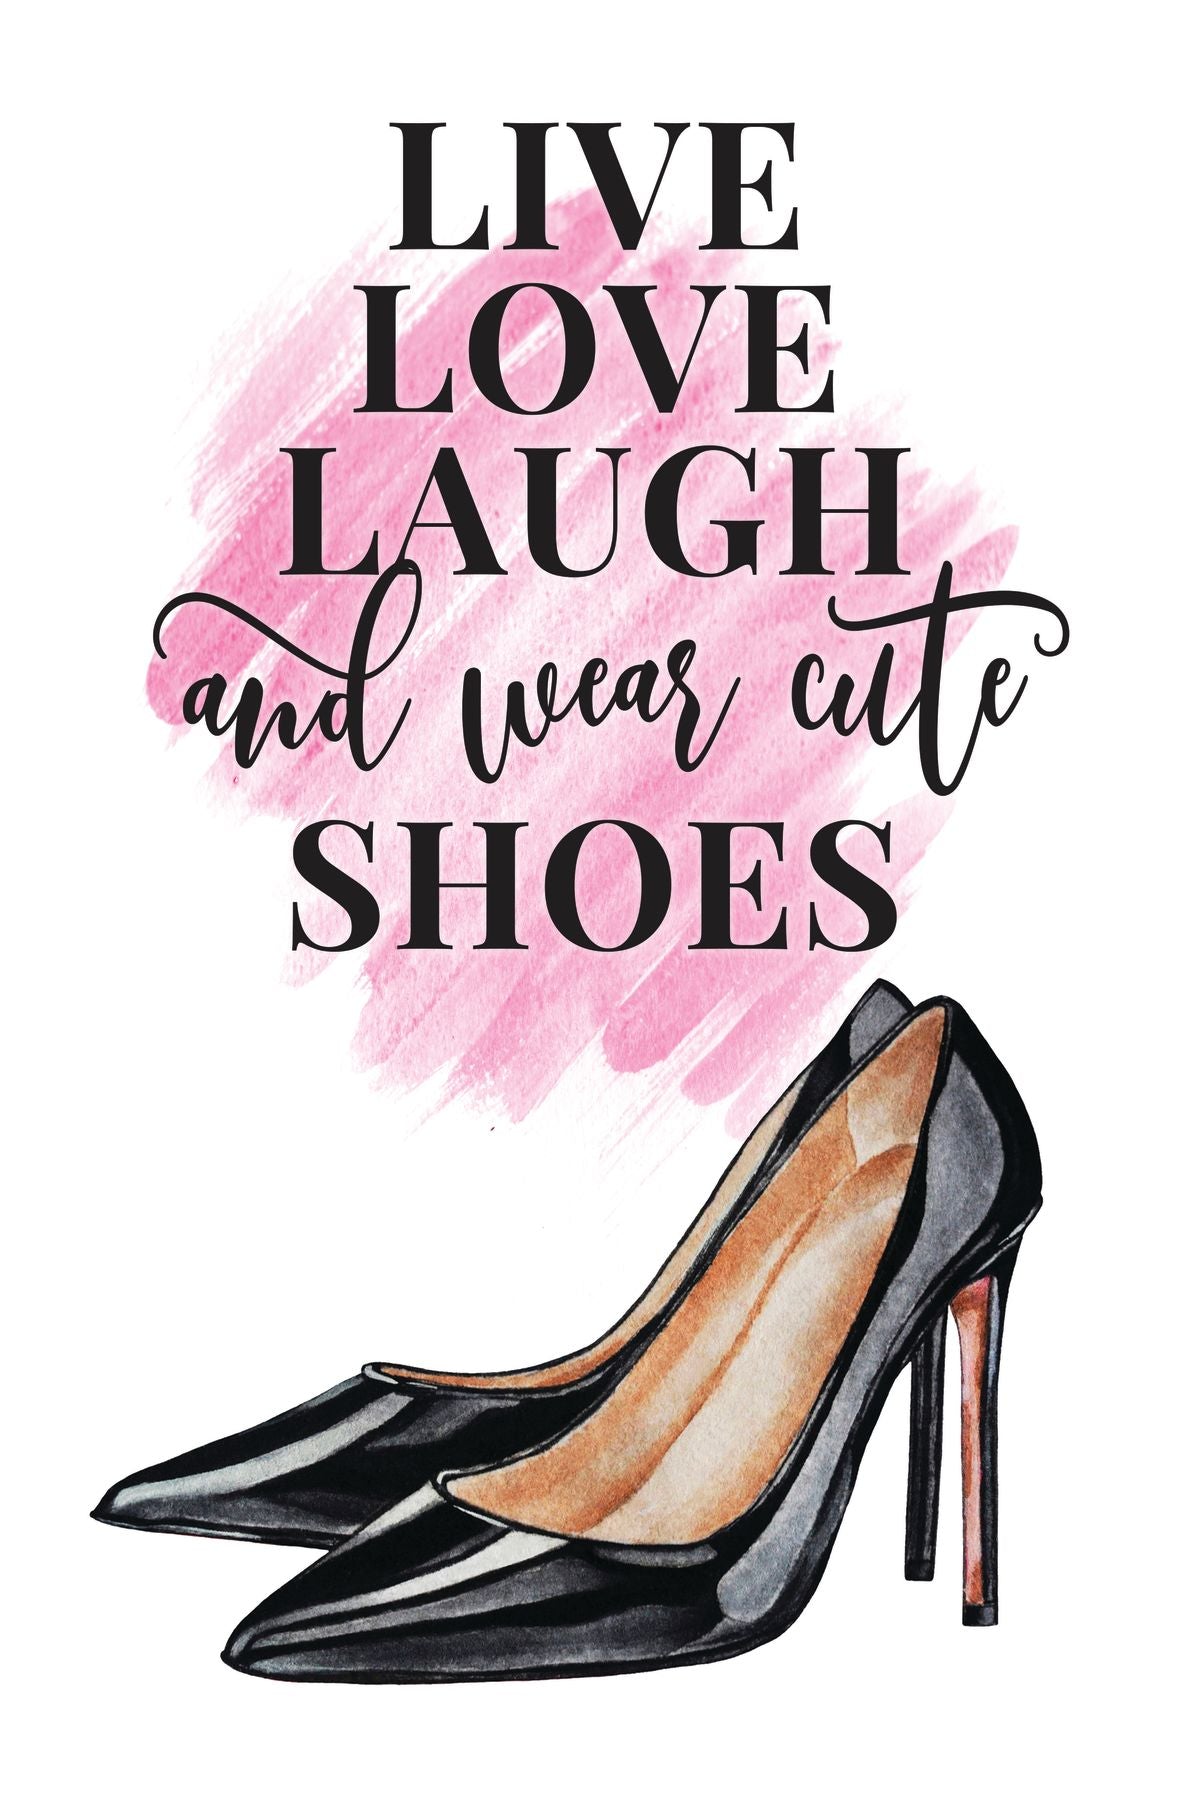 Live Laugh Love Shoes Typography